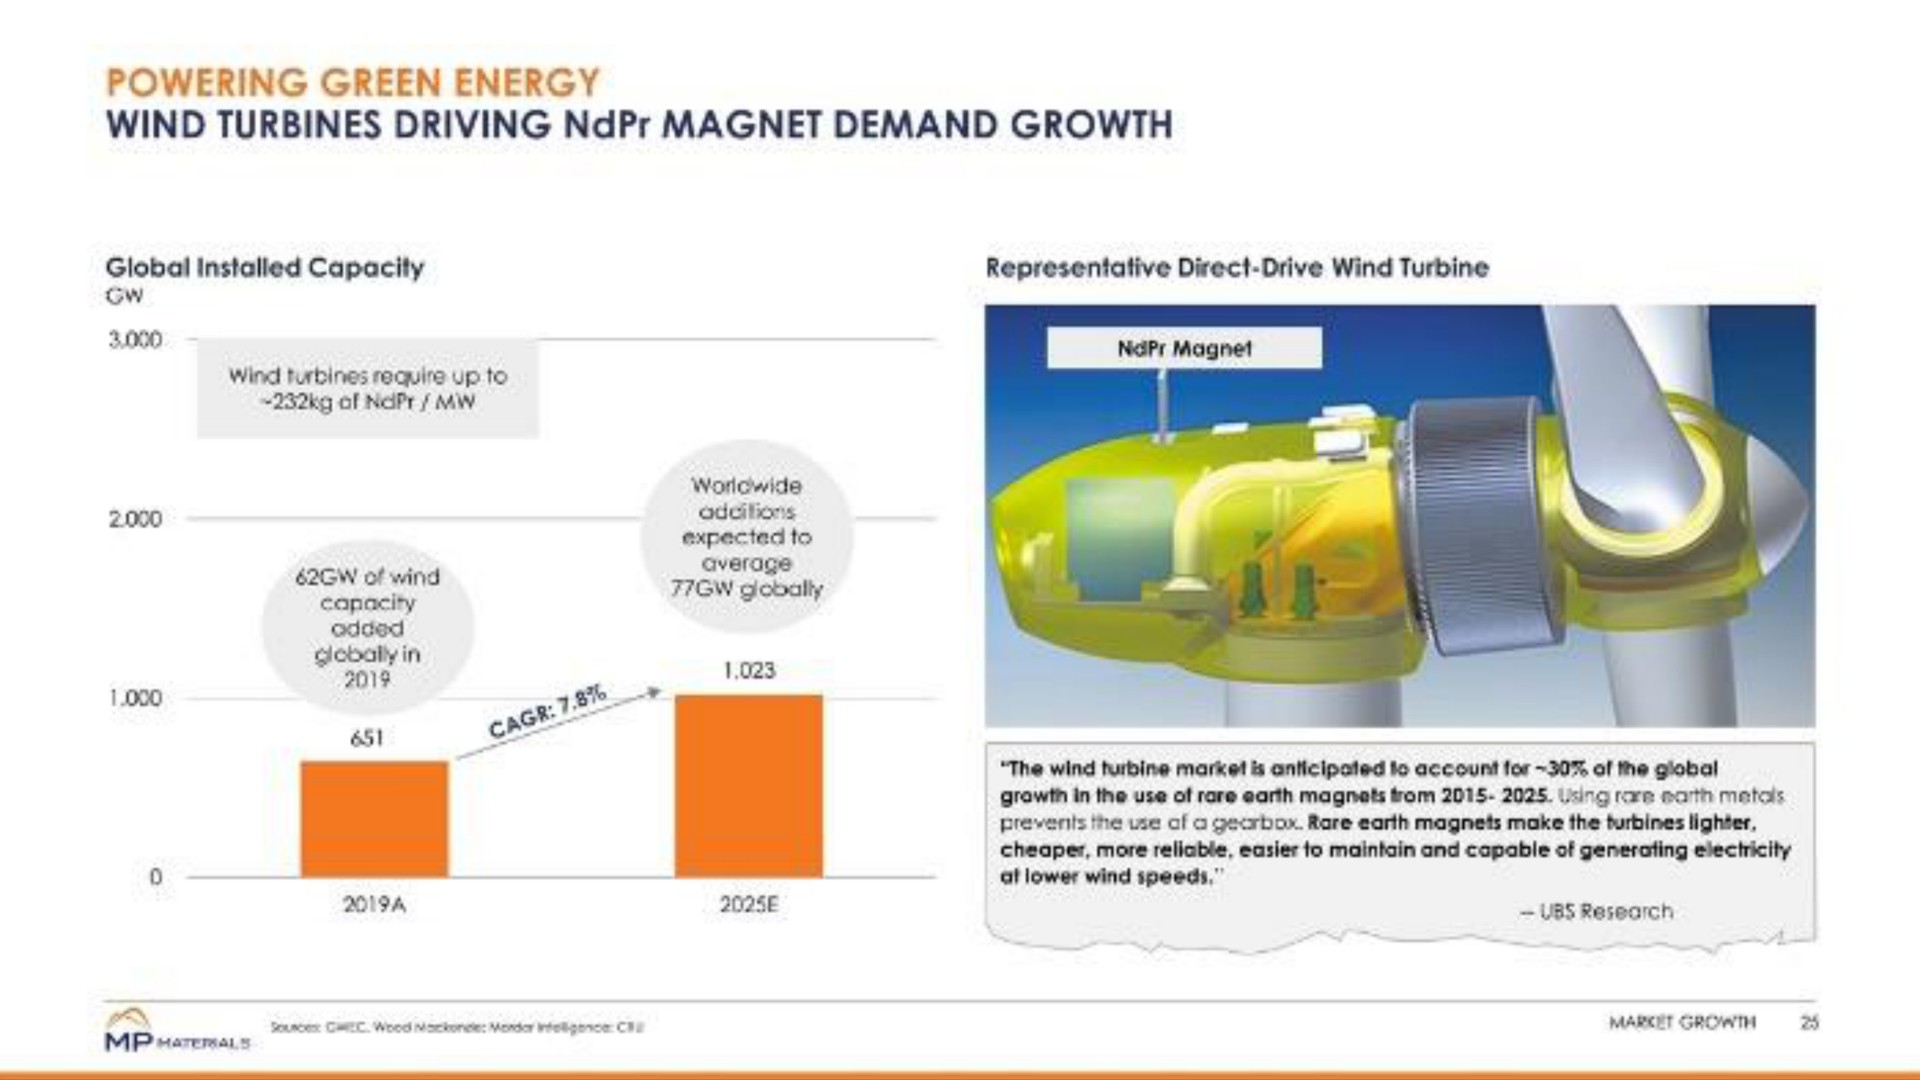 wind turbines driving magnet demand growth | MP Materials